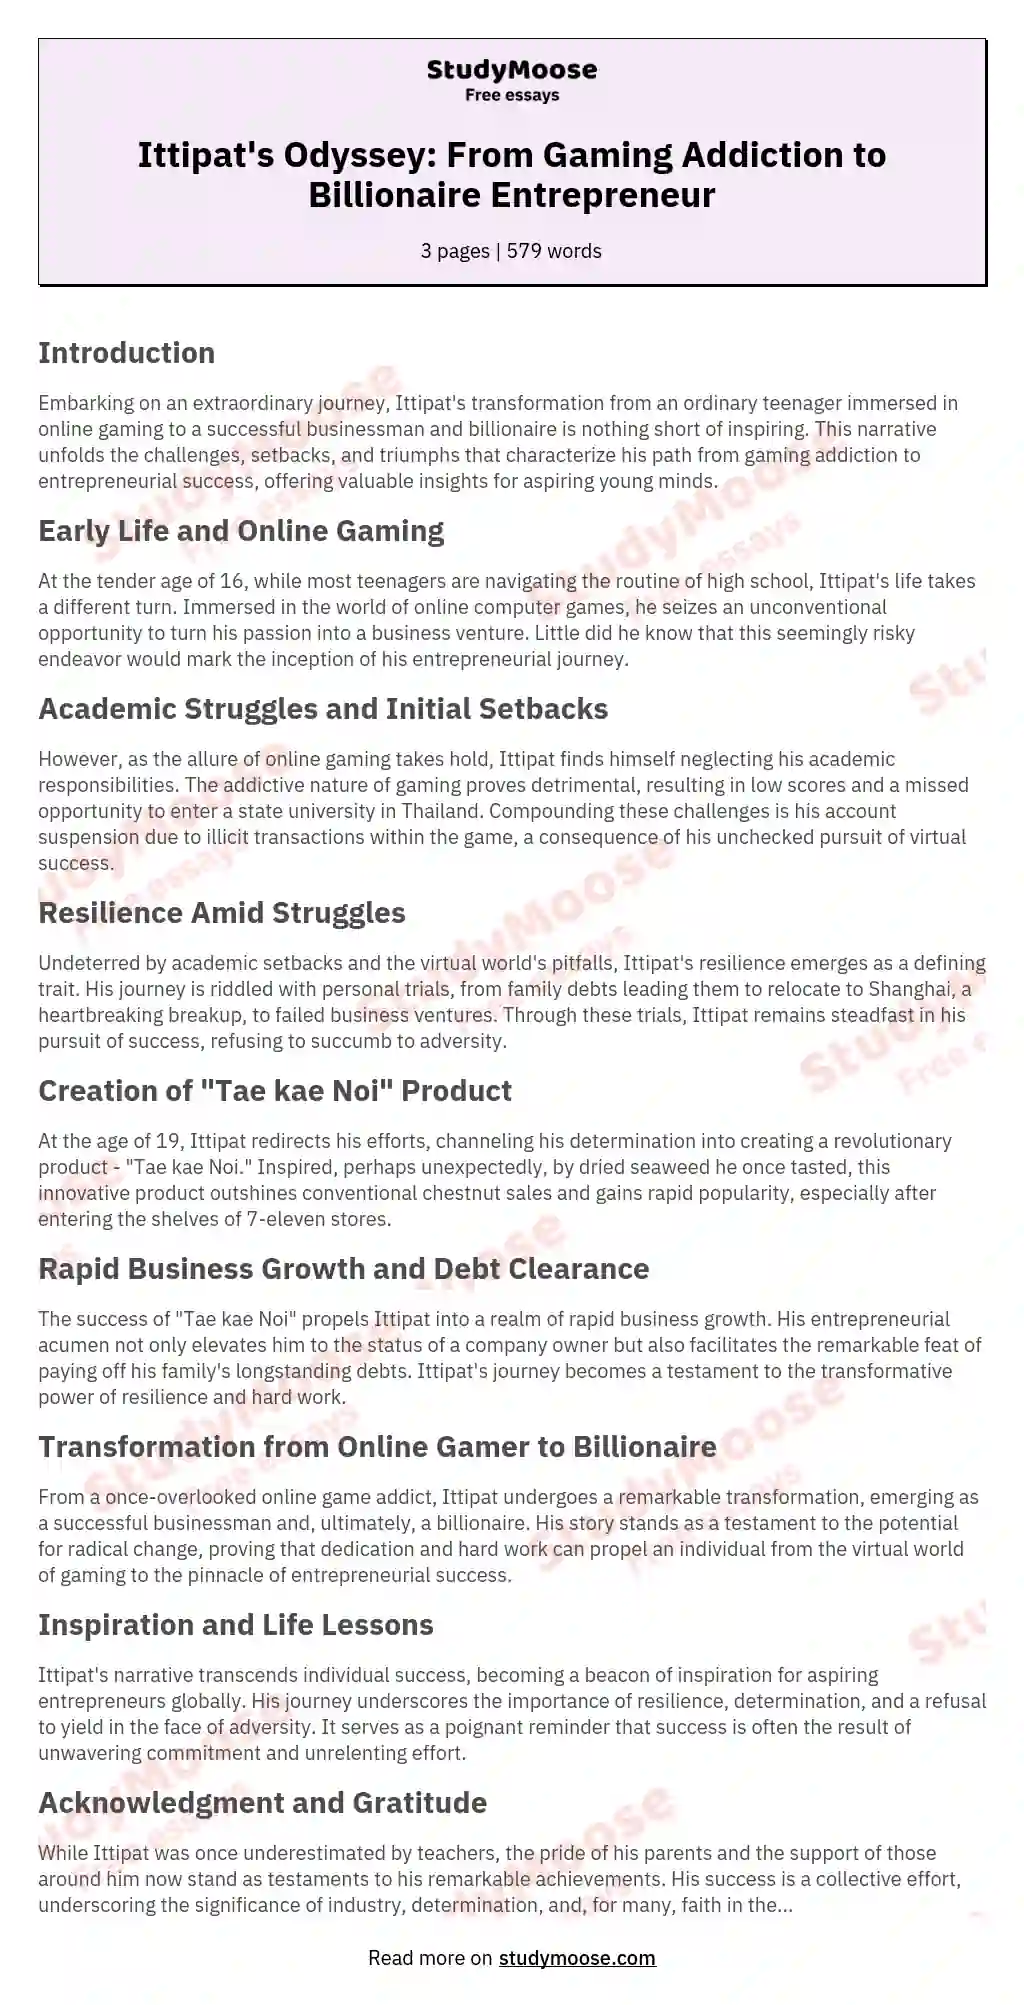 Ittipat's Odyssey: From Gaming Addiction to Billionaire Entrepreneur essay